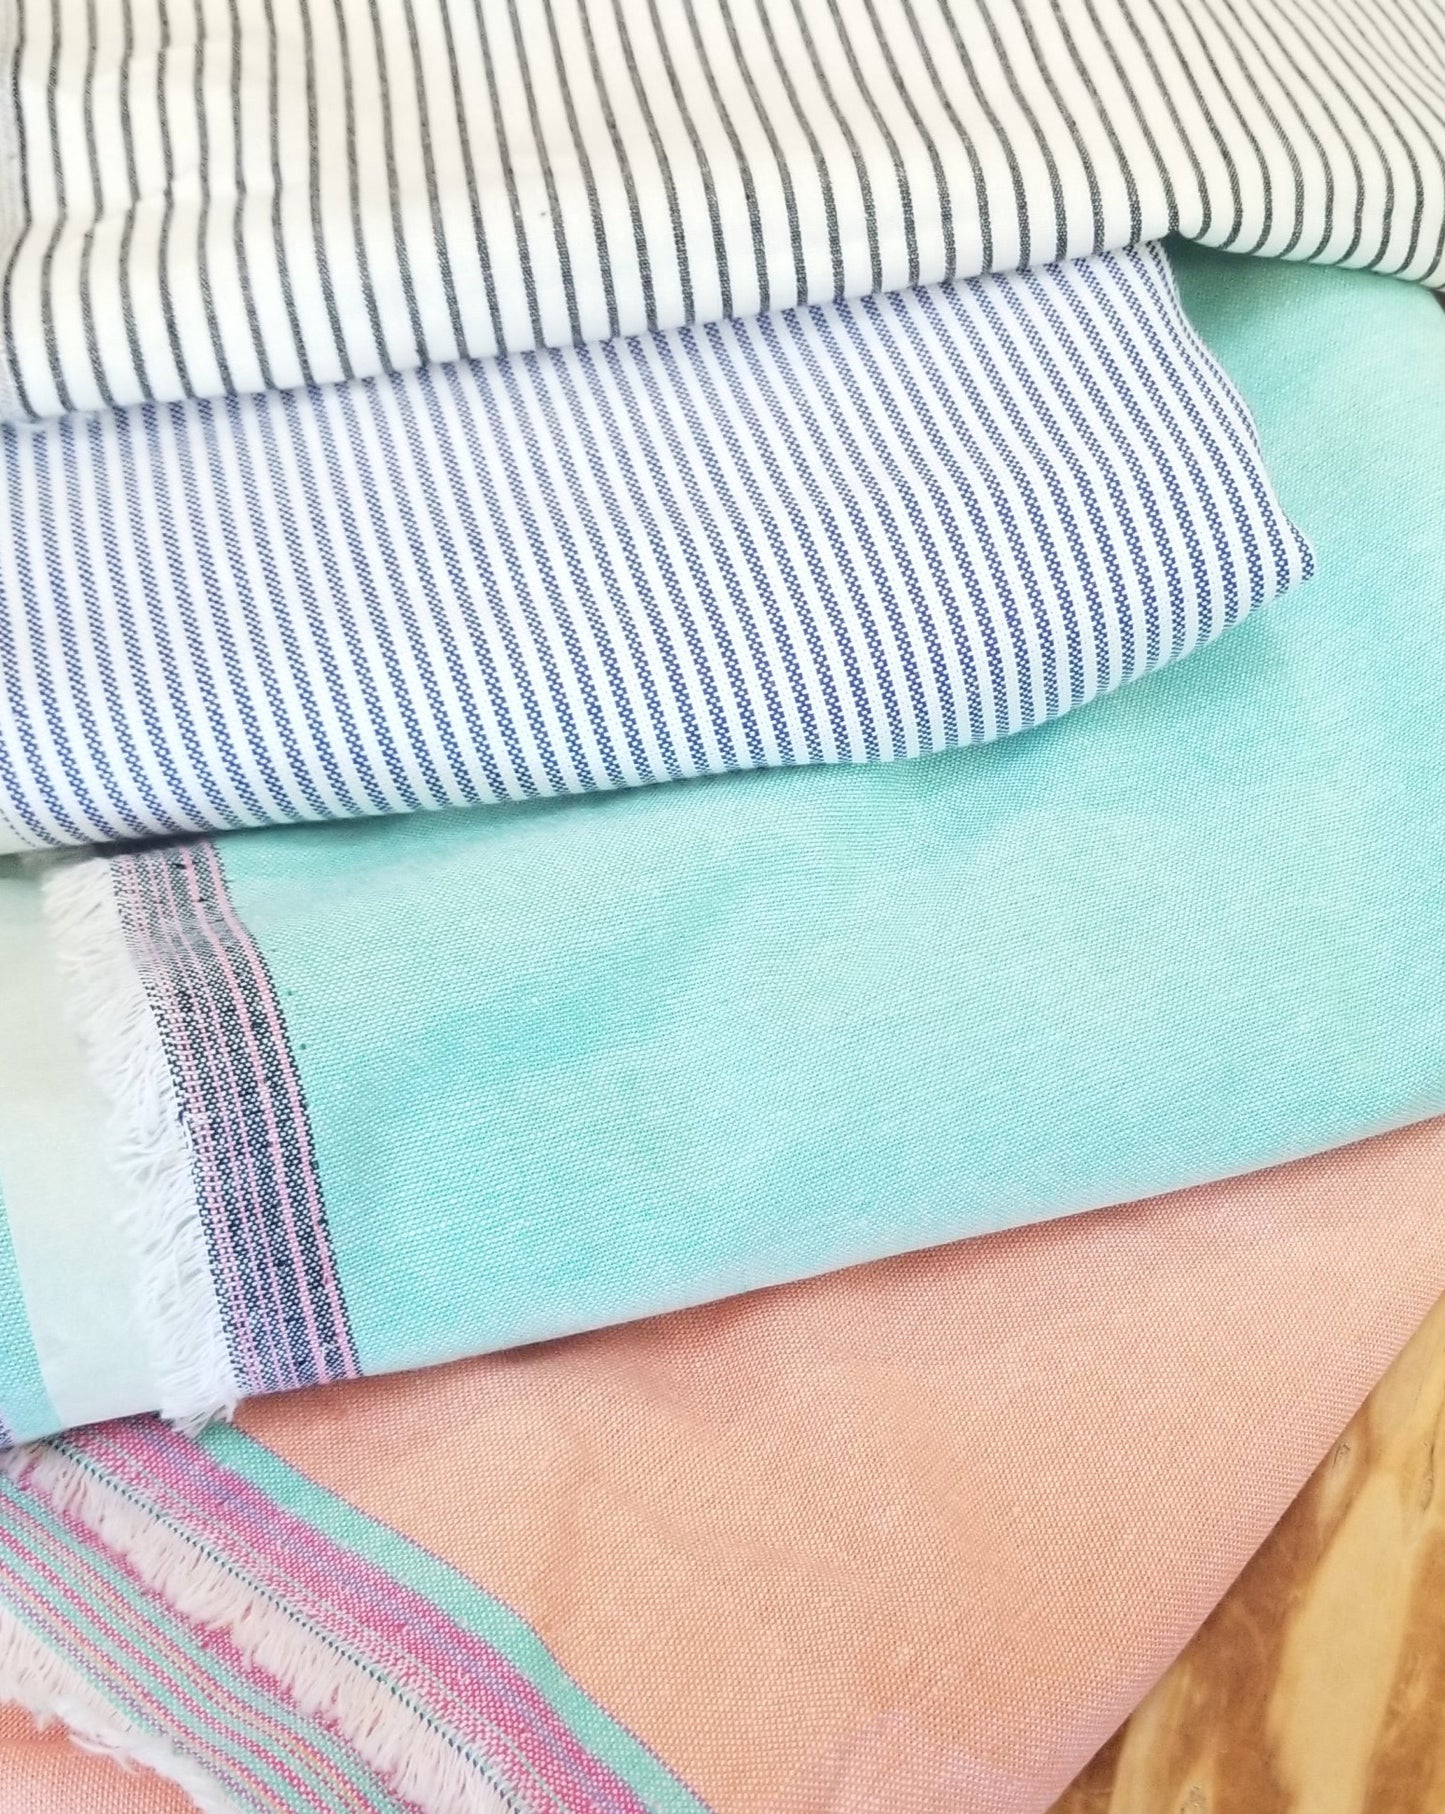 Designer Deadstock Aquamarine Green Cotton Chambray Woven with Pink Selvedge -by the yard